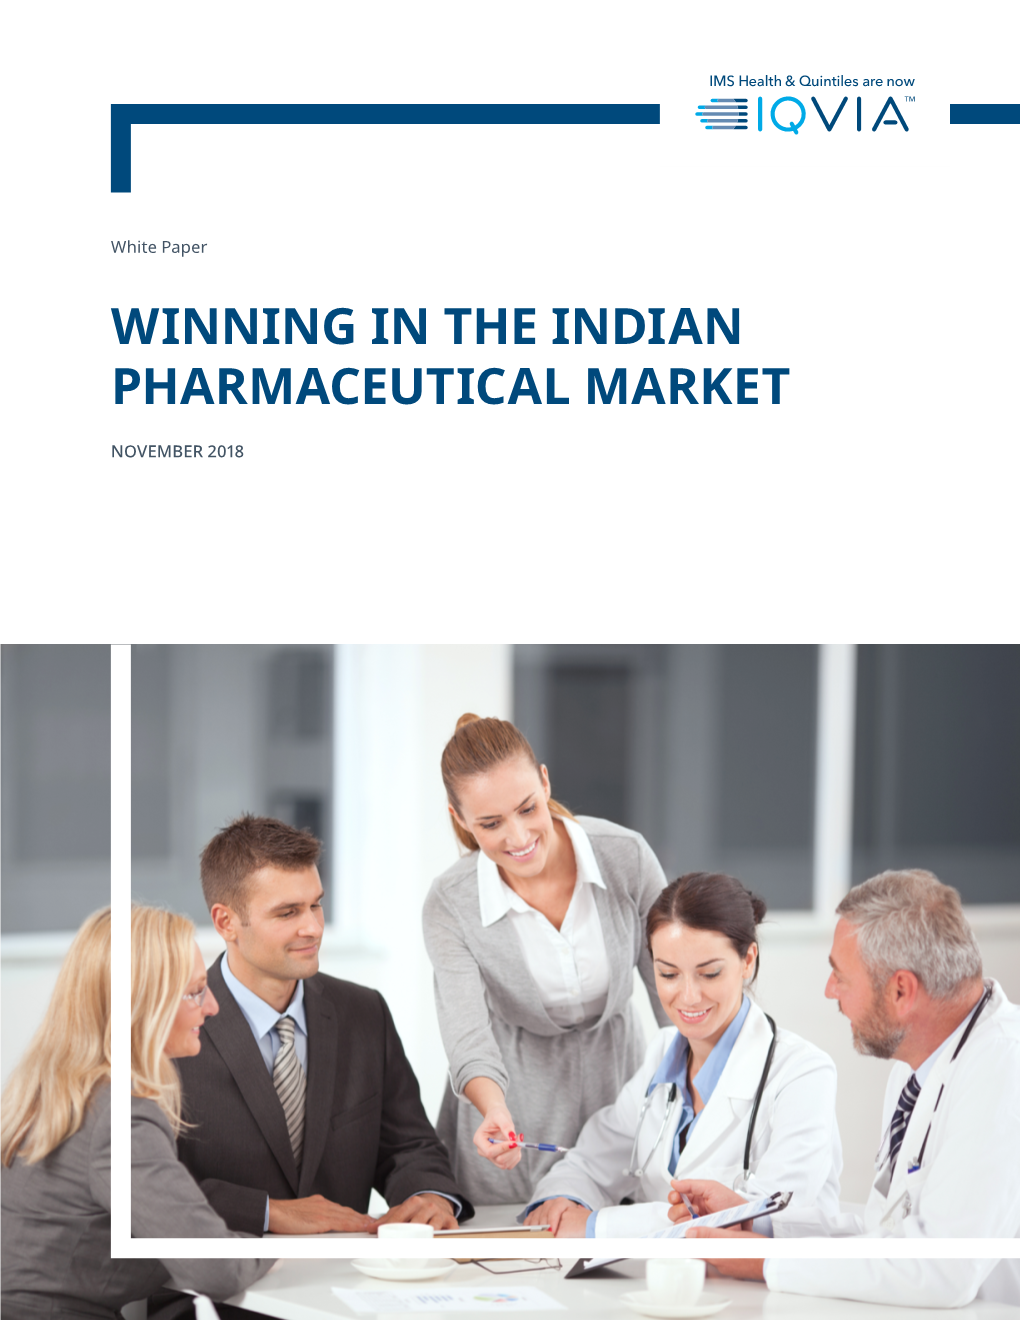 Winning in the Indian Pharmaceutical Market